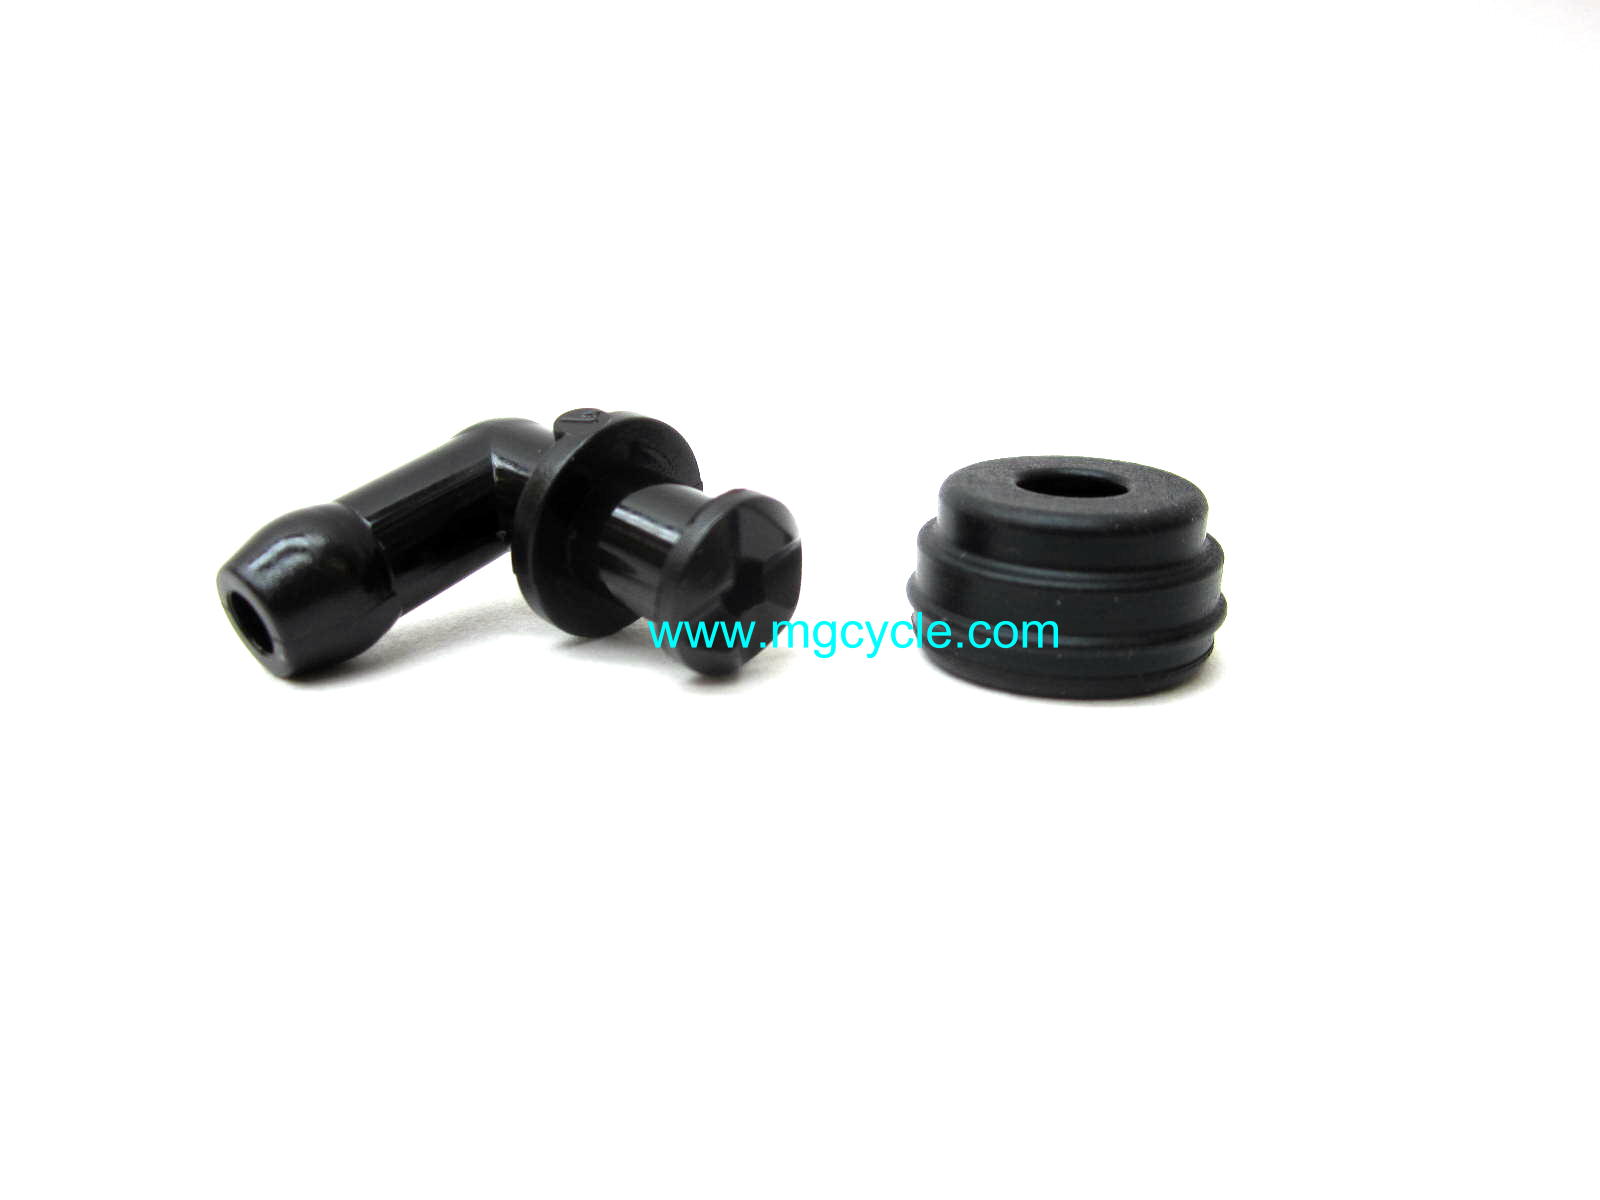 Brake fluid elbow and seal for remote reservoir master cylinders - Click Image to Close